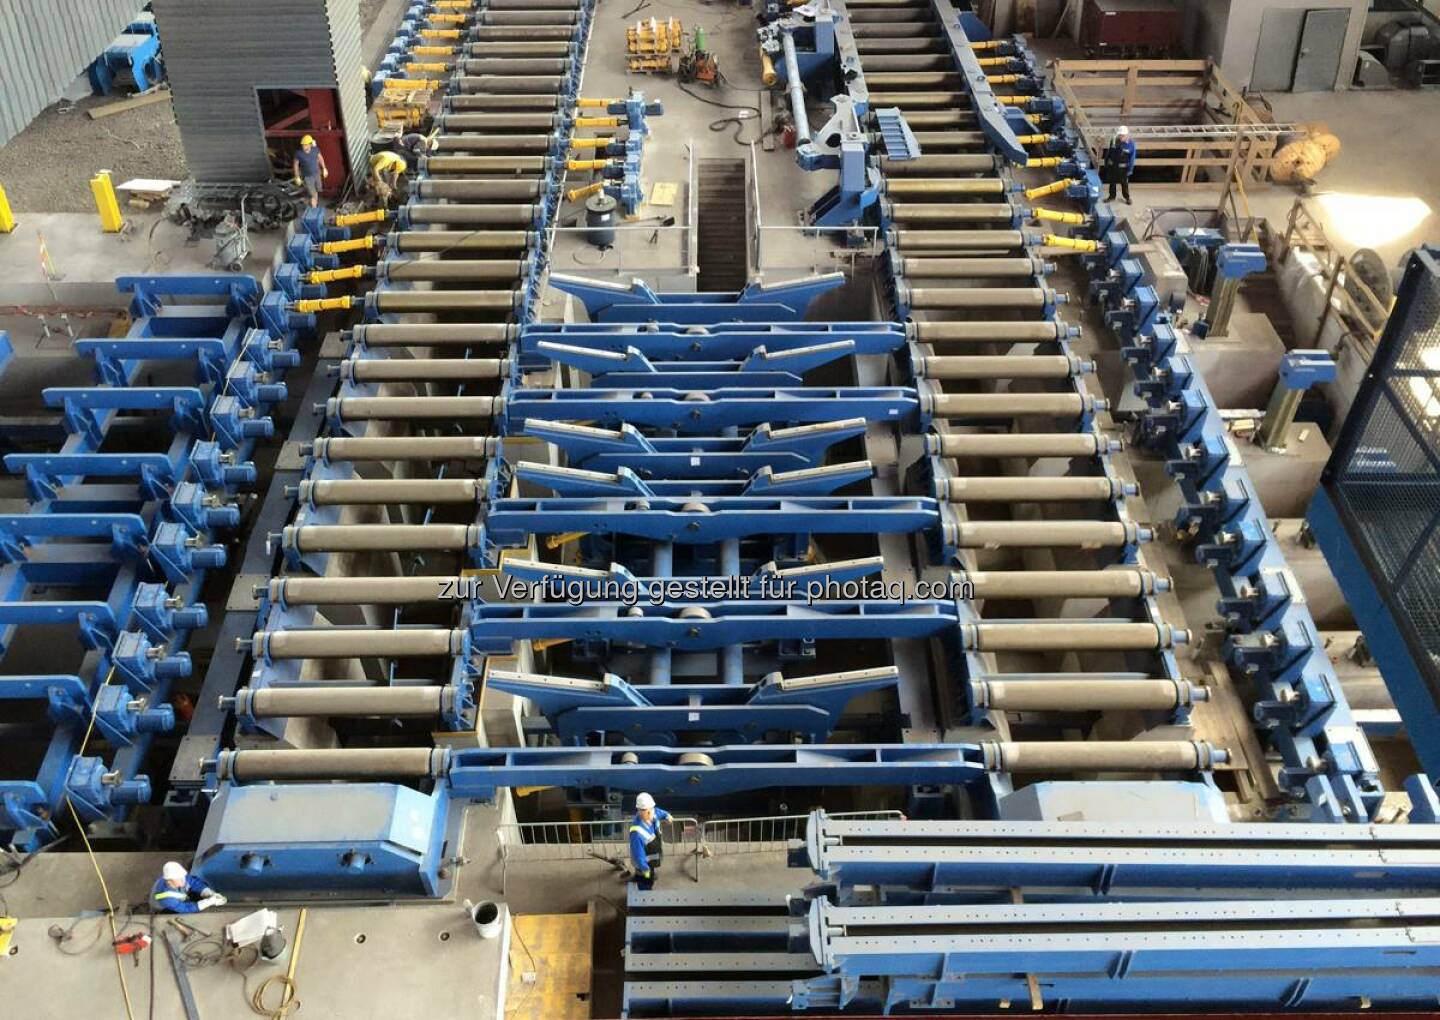 voestalpine: The runup phase for the new scarfing bay is in full swing at the Linz location of the Steel Division. Slabs of up to 2200 mm in width can now be processed. http://bit.ly/18gV6aK  Source: http://facebook.com/voestalpine